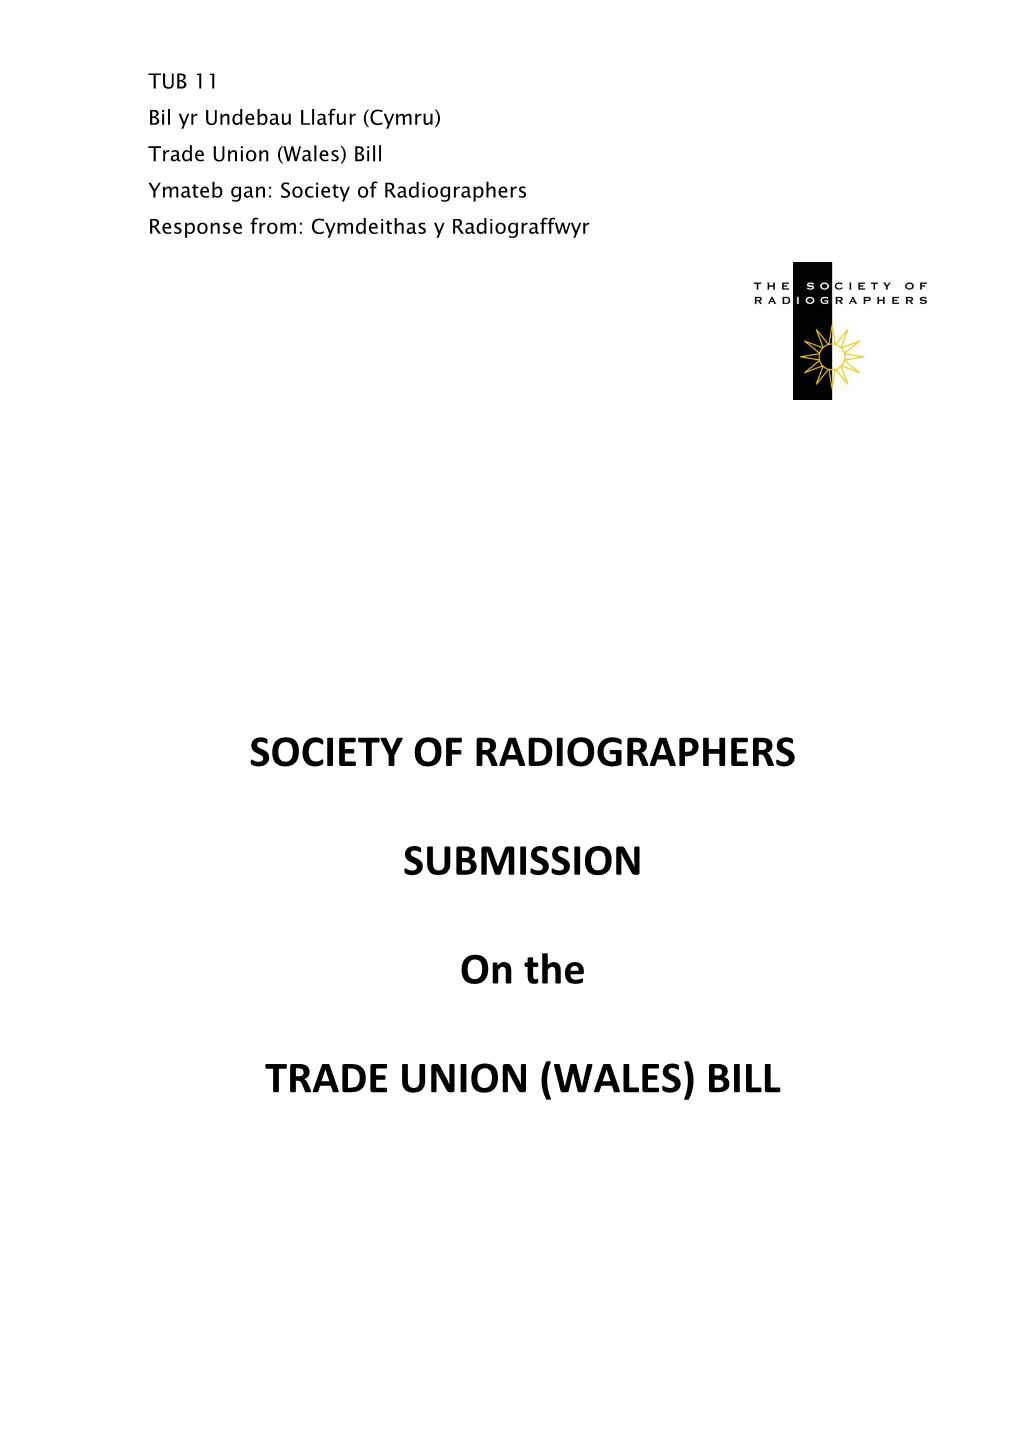 SOCIETY of RADIOGRAPHERS SUBMISSION on the TRADE UNION (WALES) BILL